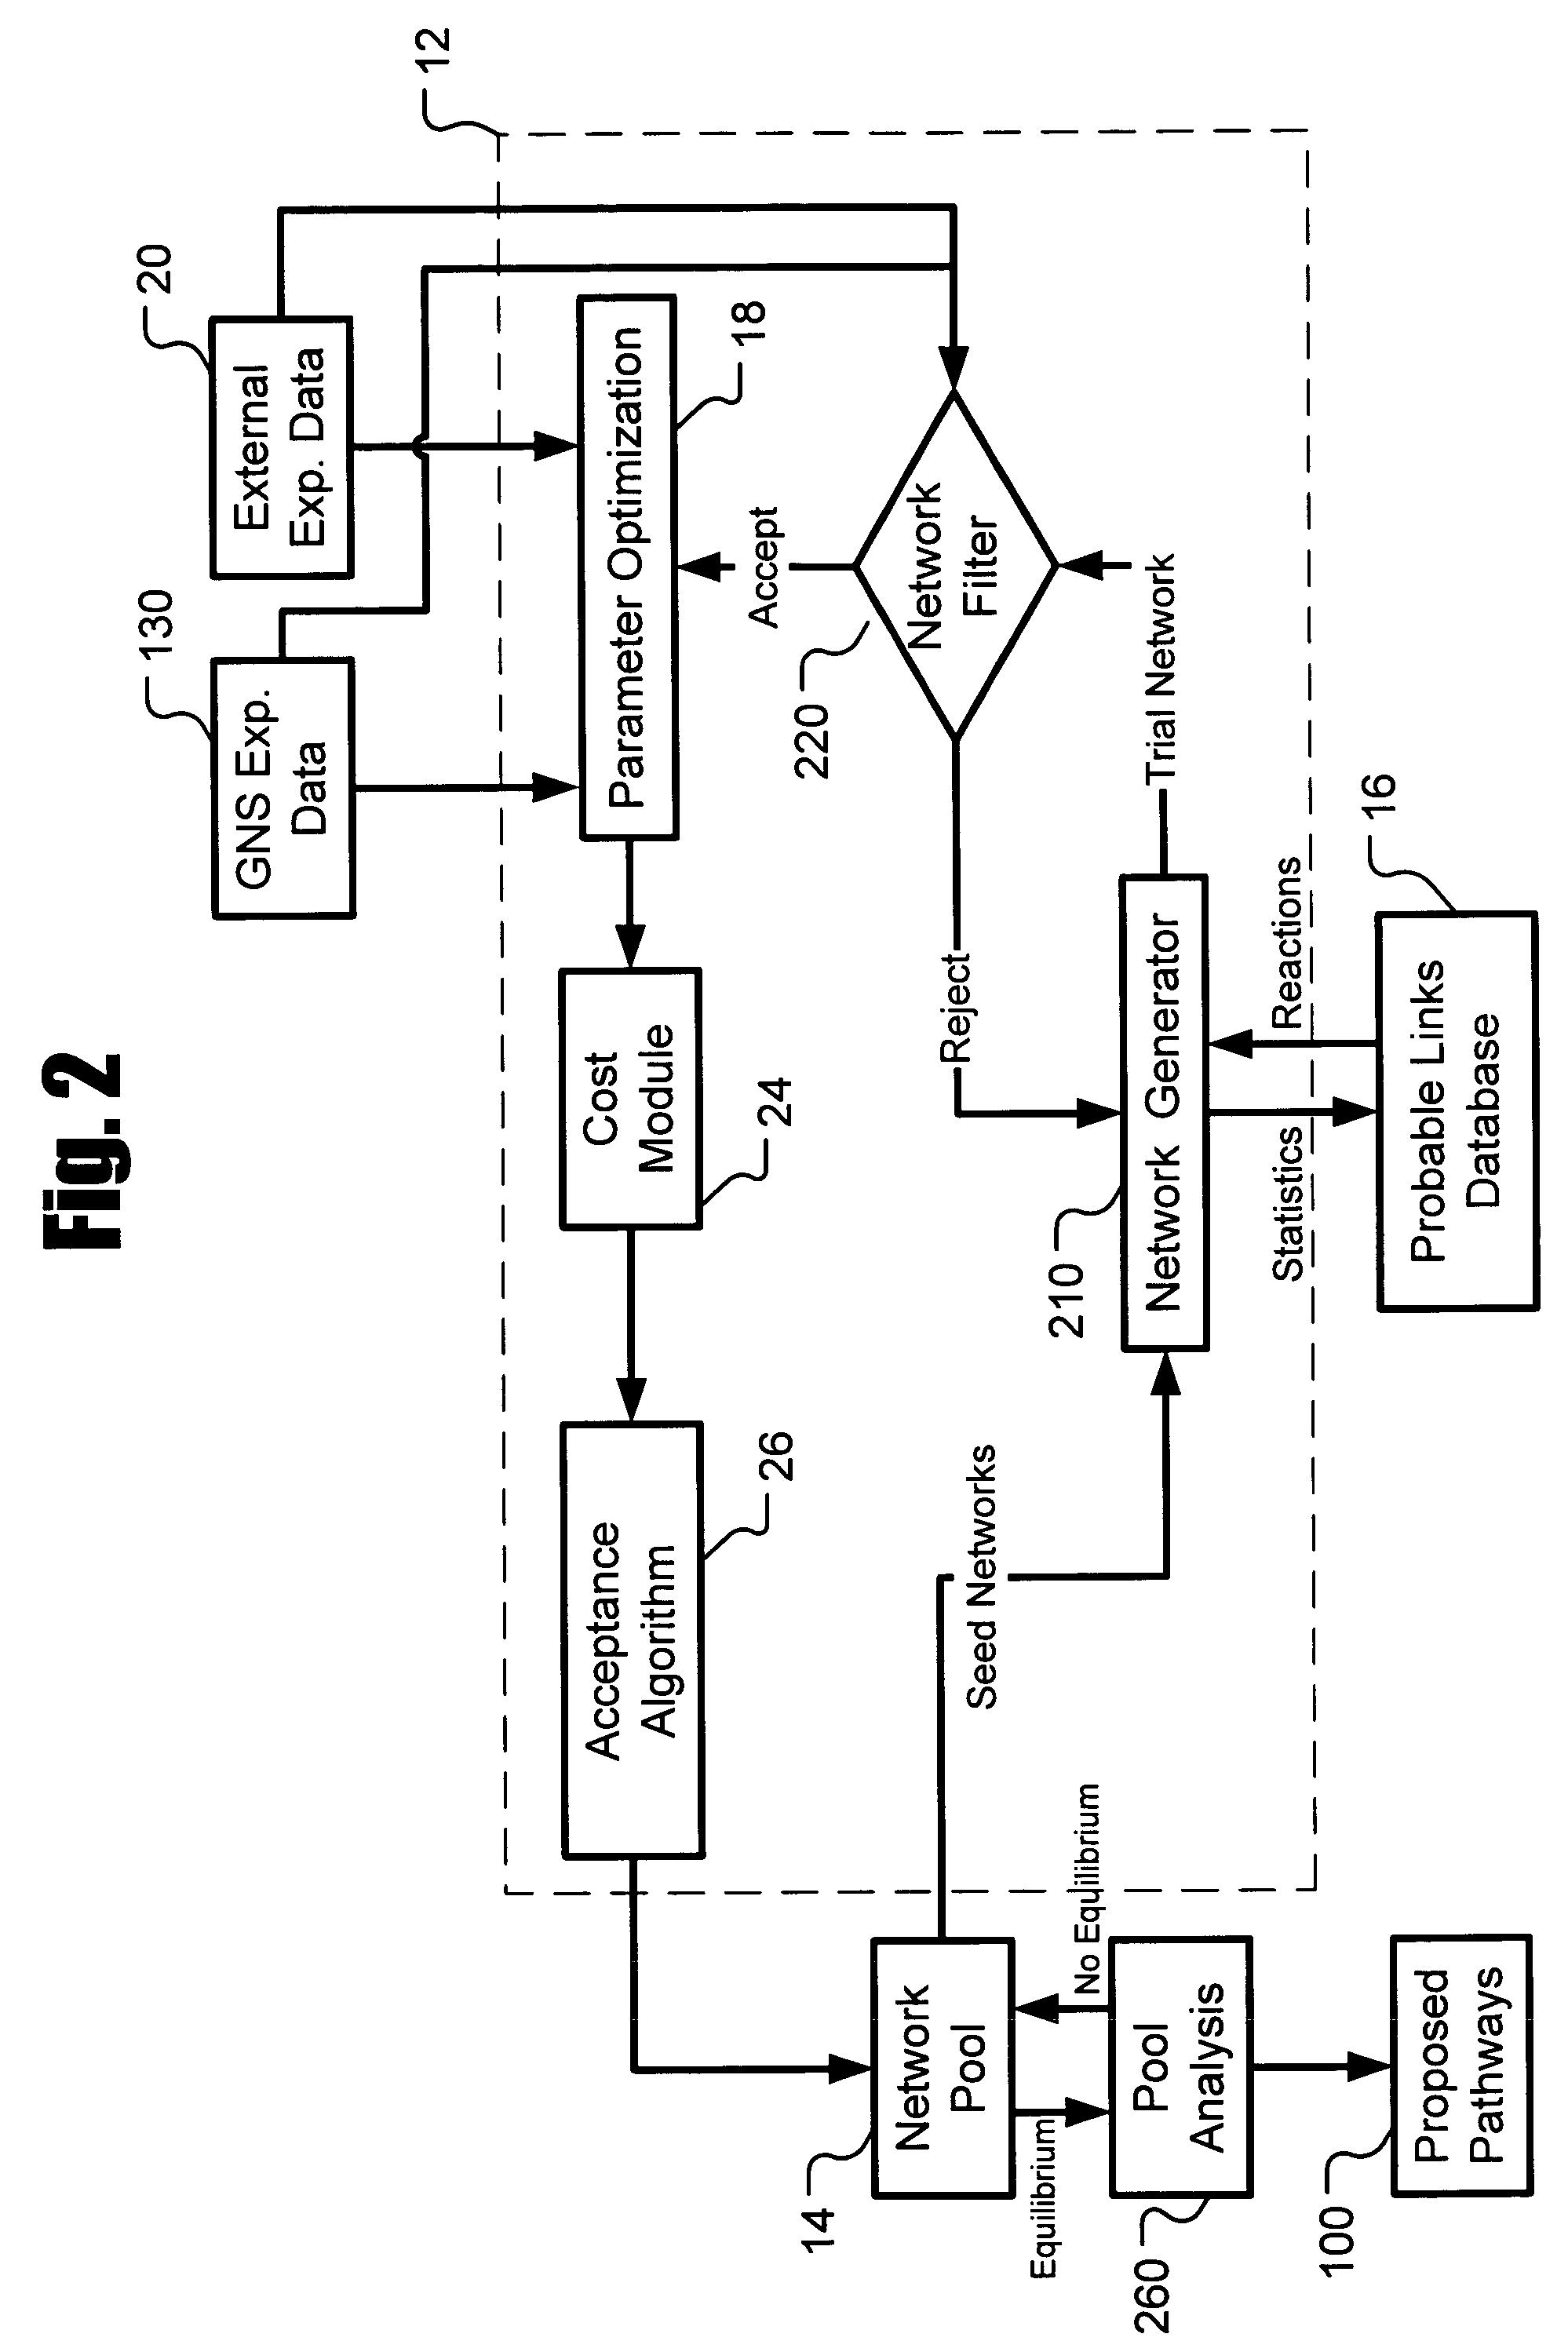 Systems and methods for inferring biological networks